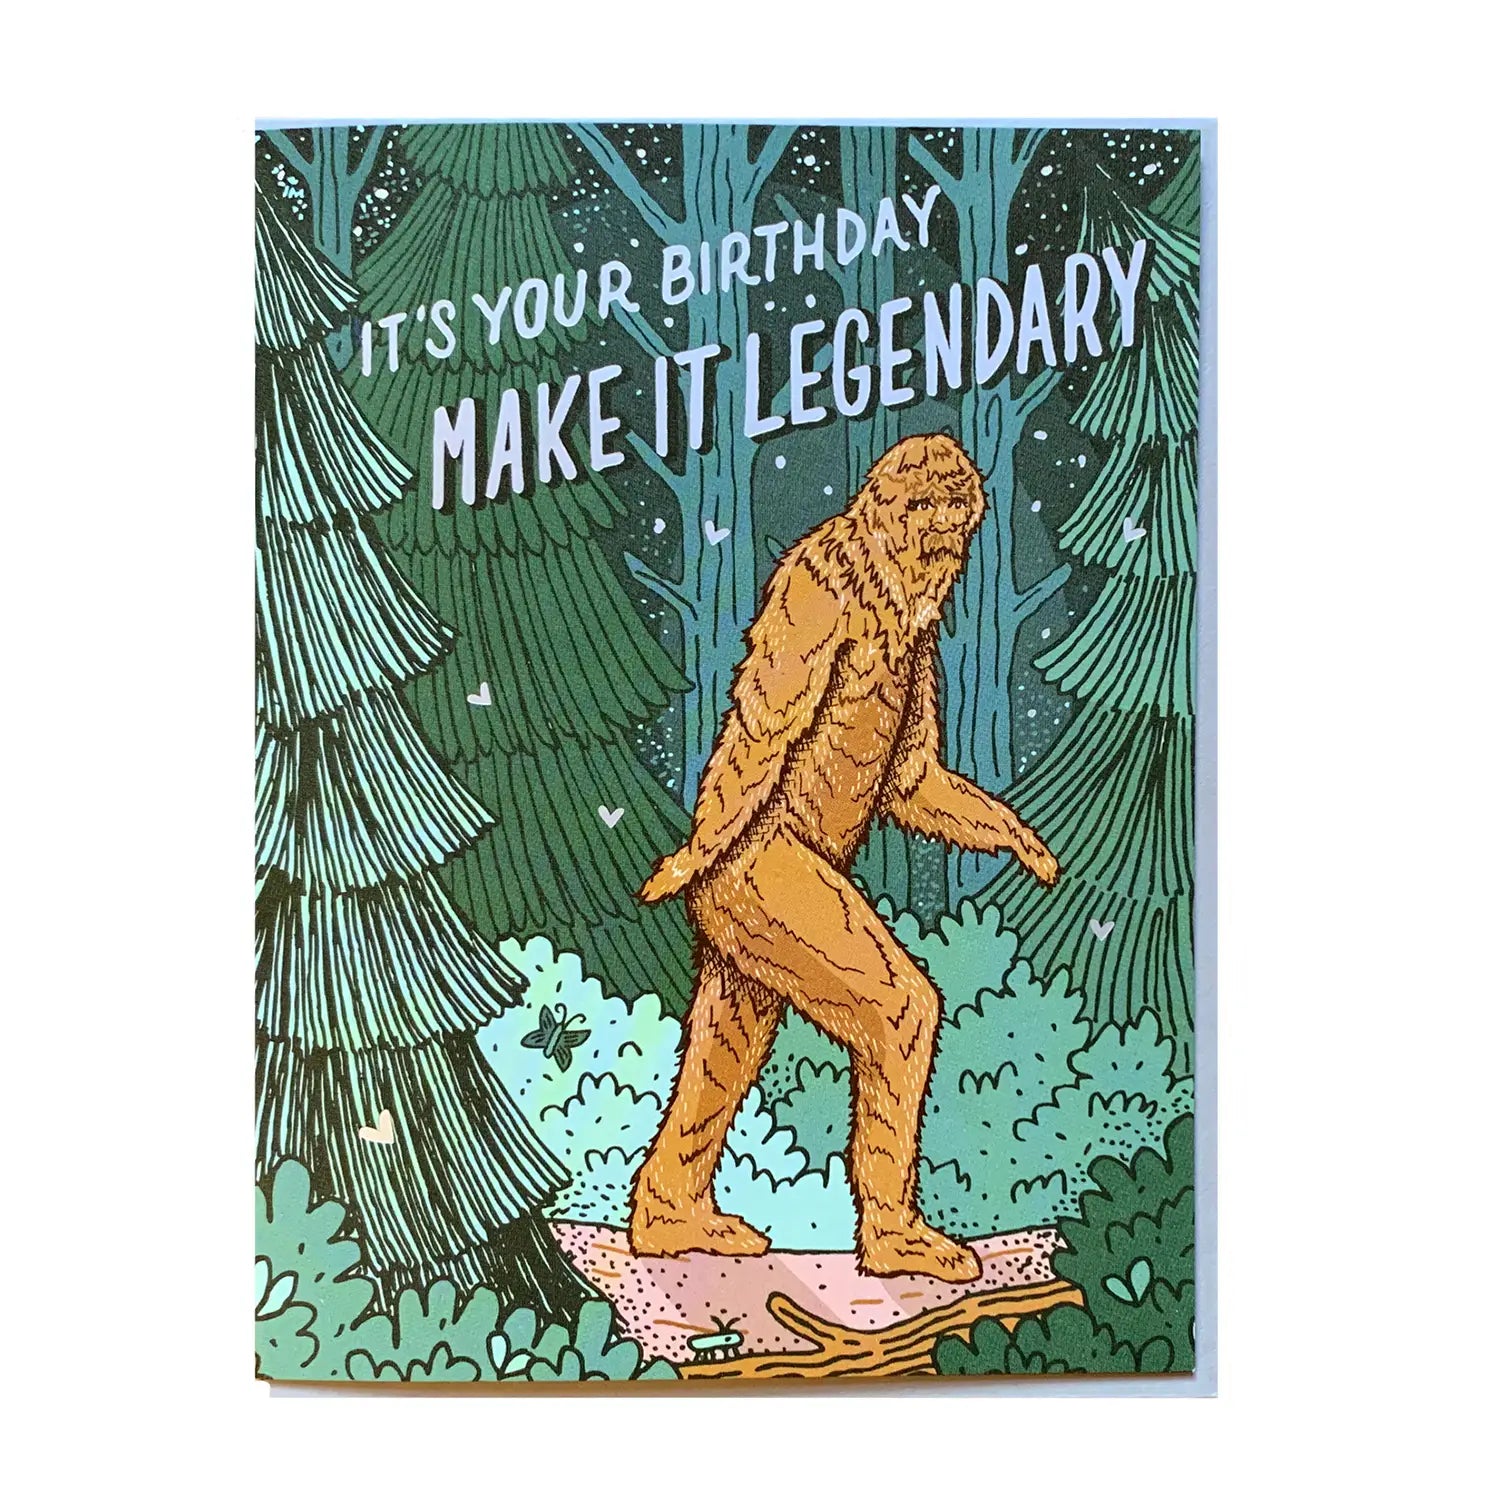 White card with shades of green forest and a brown big foot walking. Light blue block letters read "it's your birthday, make it legendary"